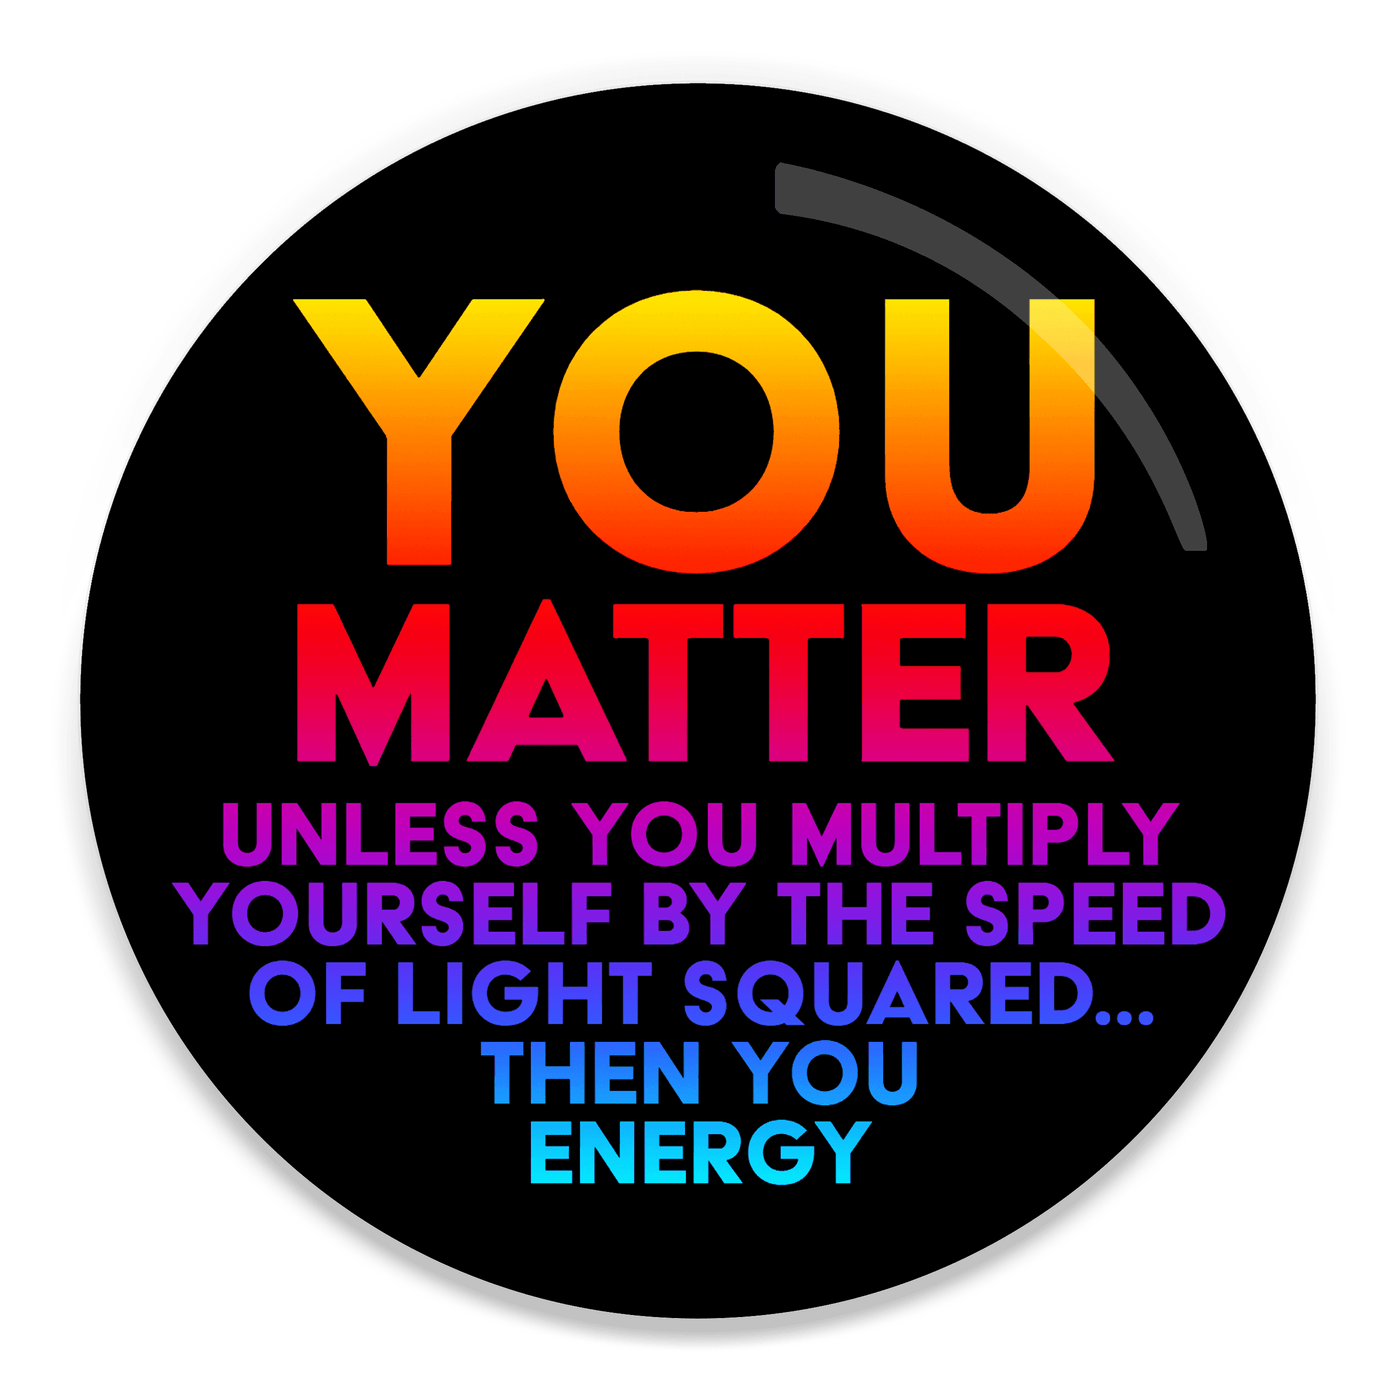 2.25 inch round colorful magnet with image of text with a relativistic joke about you matter 